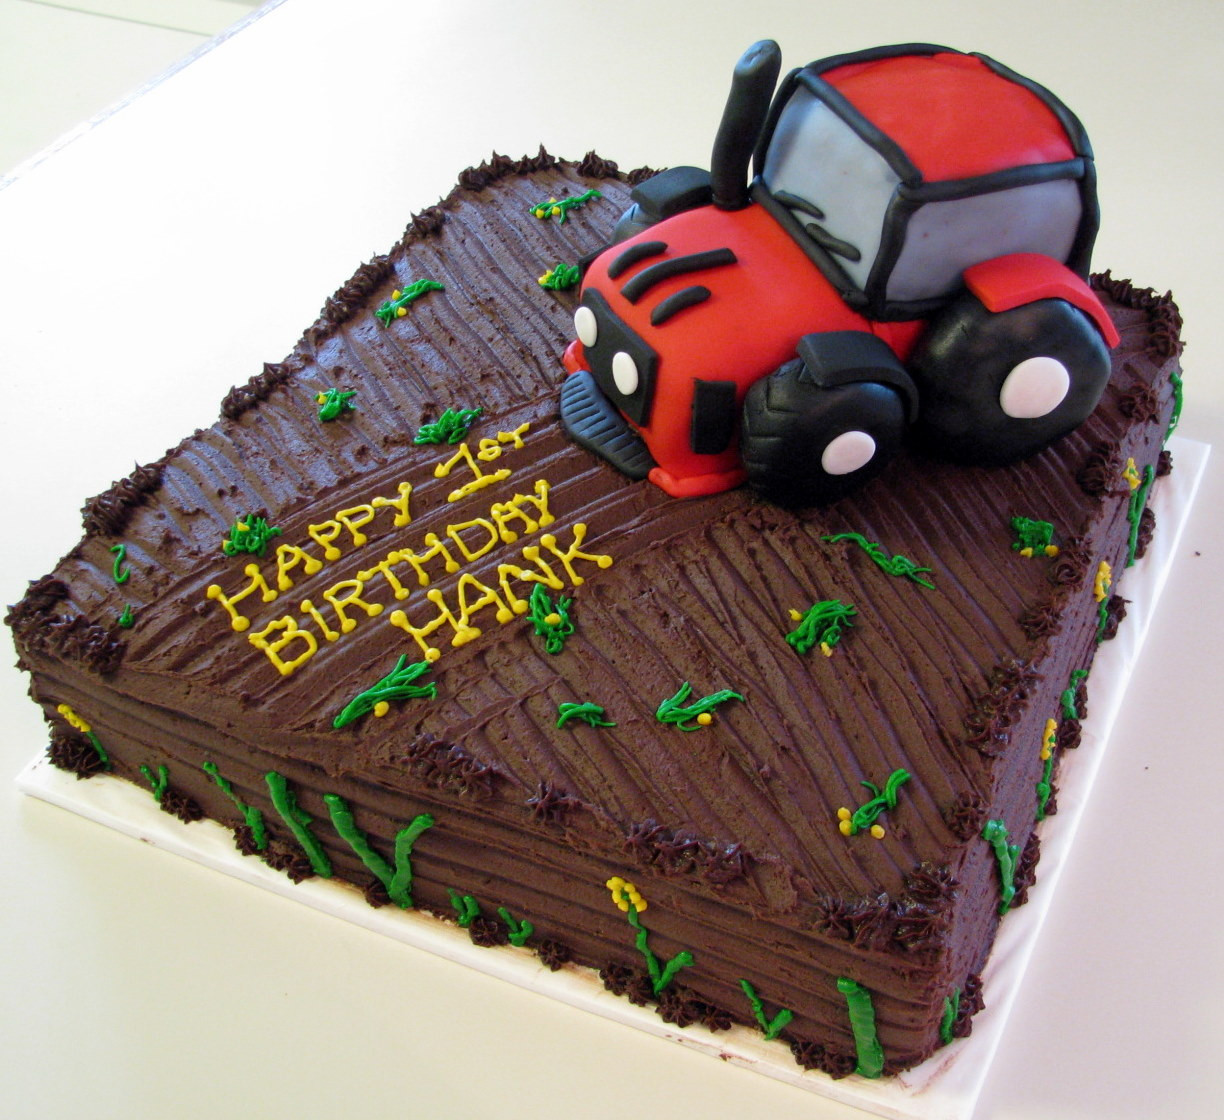 Tractor Birthday Cake
 Tractor Cakes – Decoration Ideas